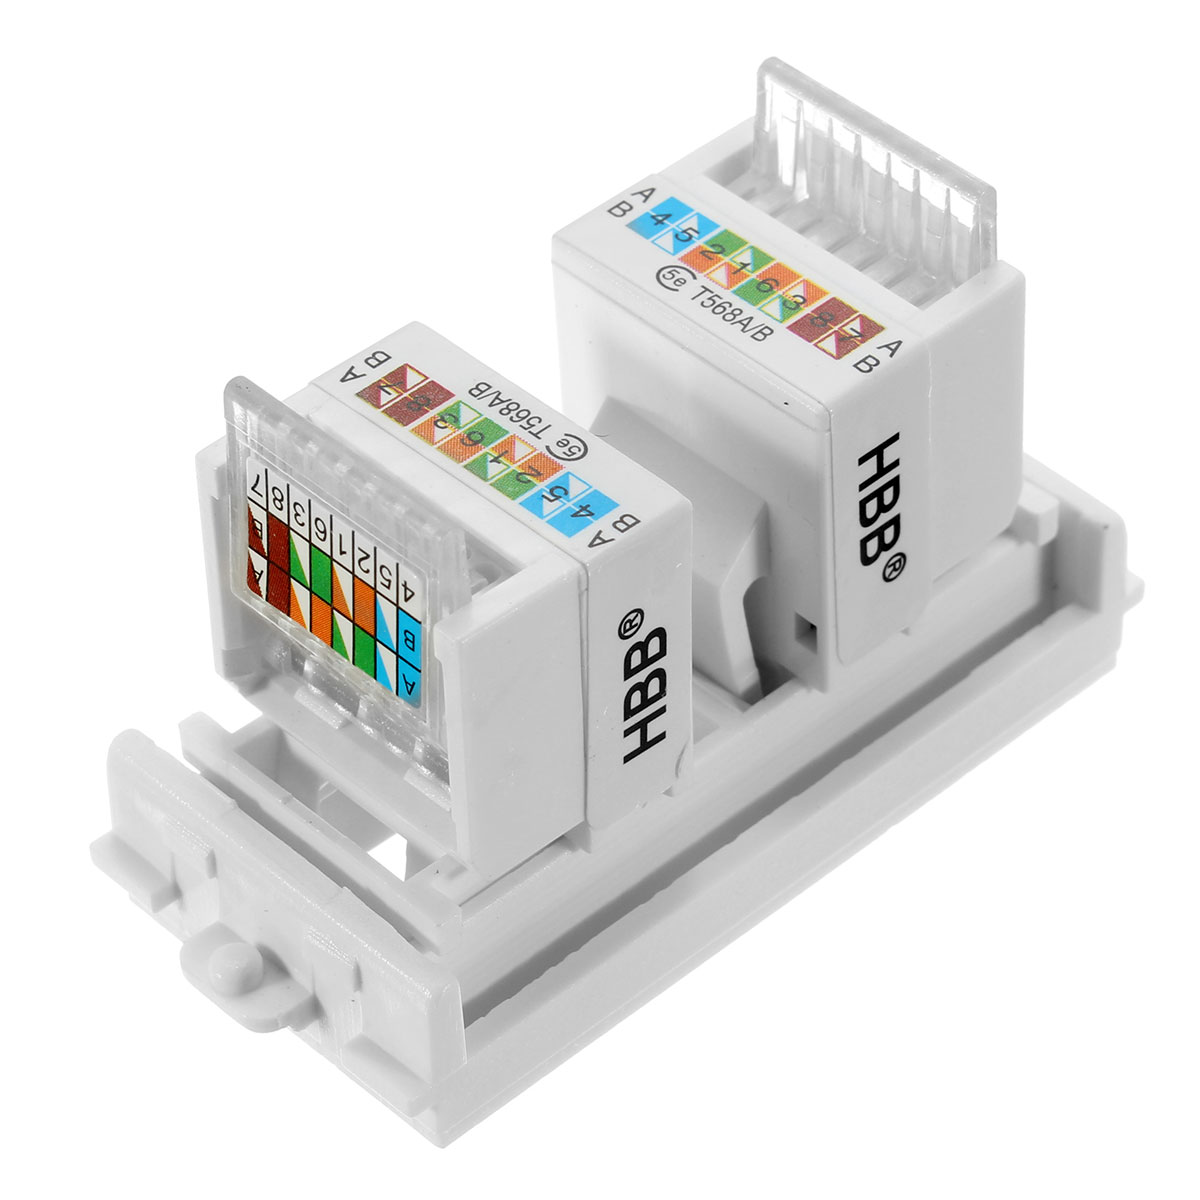 RJ45-Wall-Plate-Dual-Port-Socket-Panel-Building-Materials-Network-Combination-Connector-Module-1401148-3